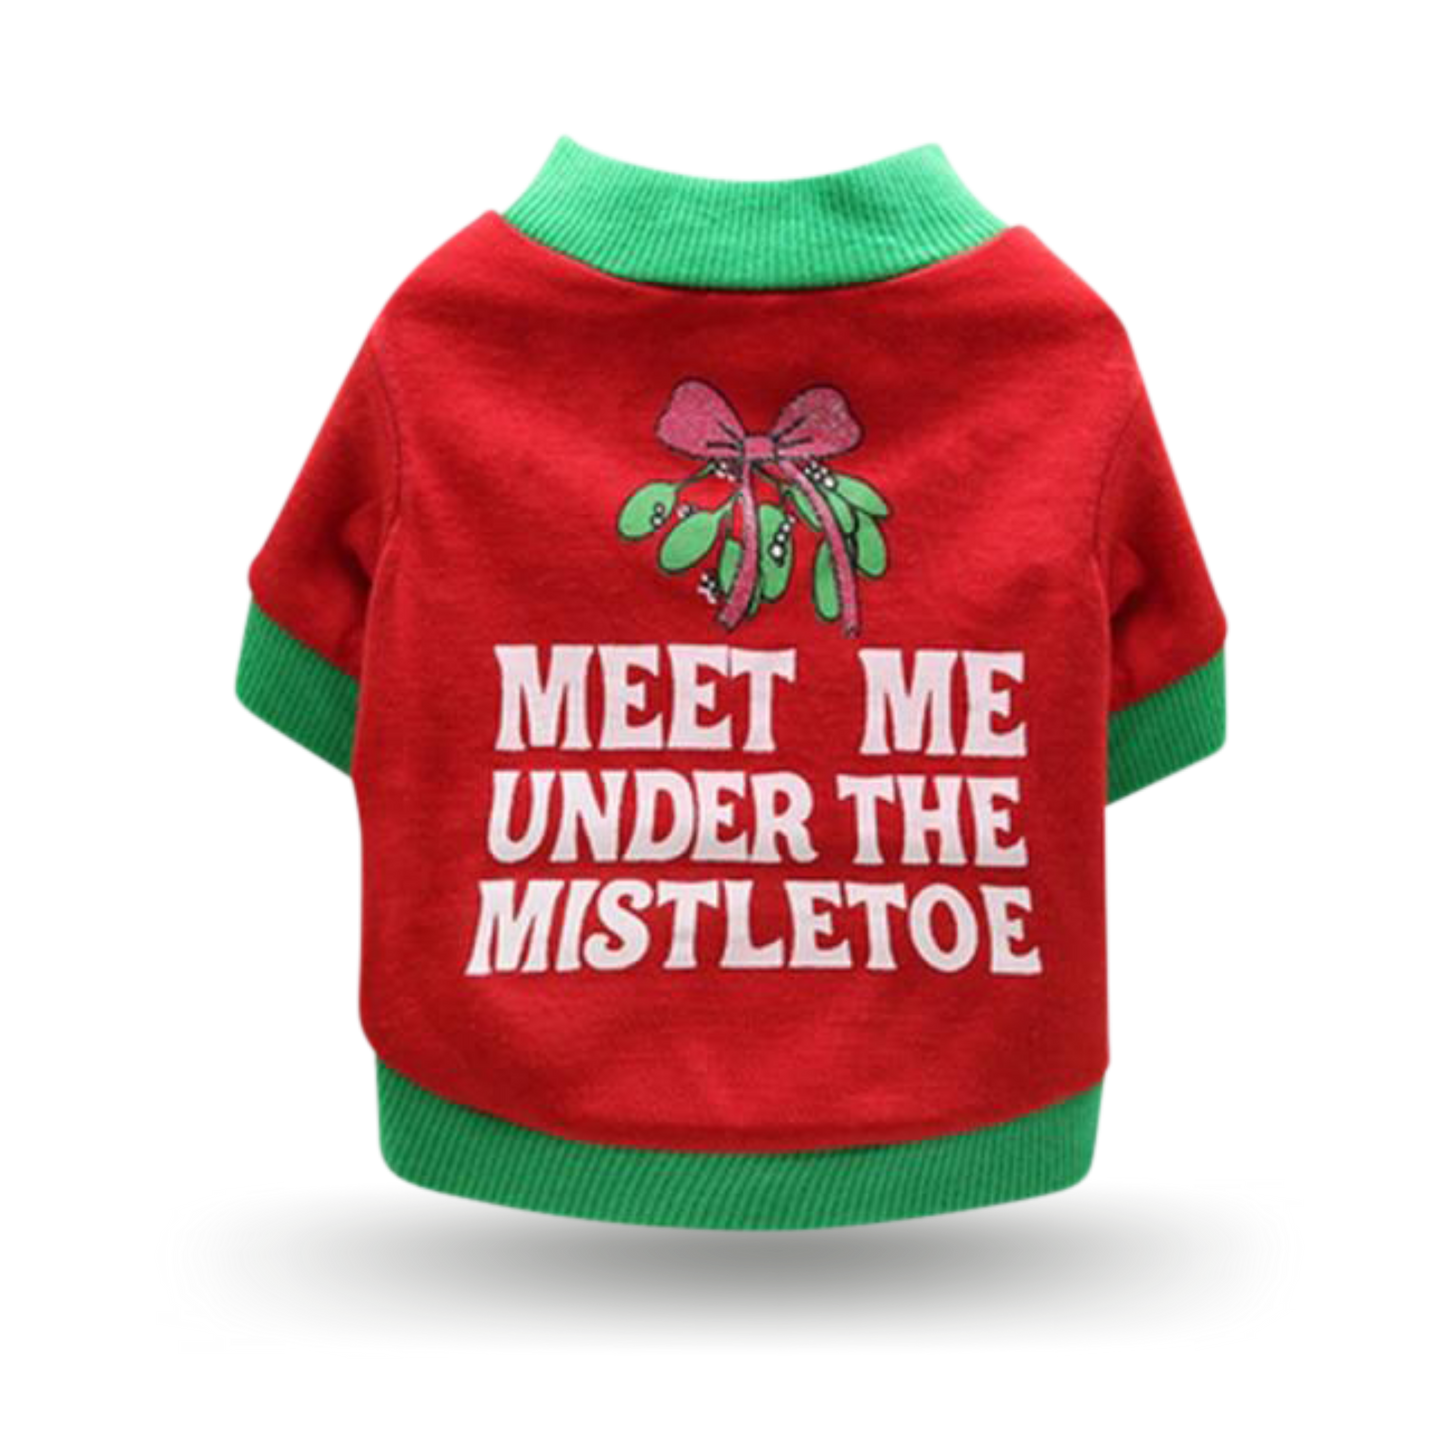 Soft cotton red t-shirt with ribbing collar, arm and waist bands with "Meet me under the mistletoe" screen printed motif